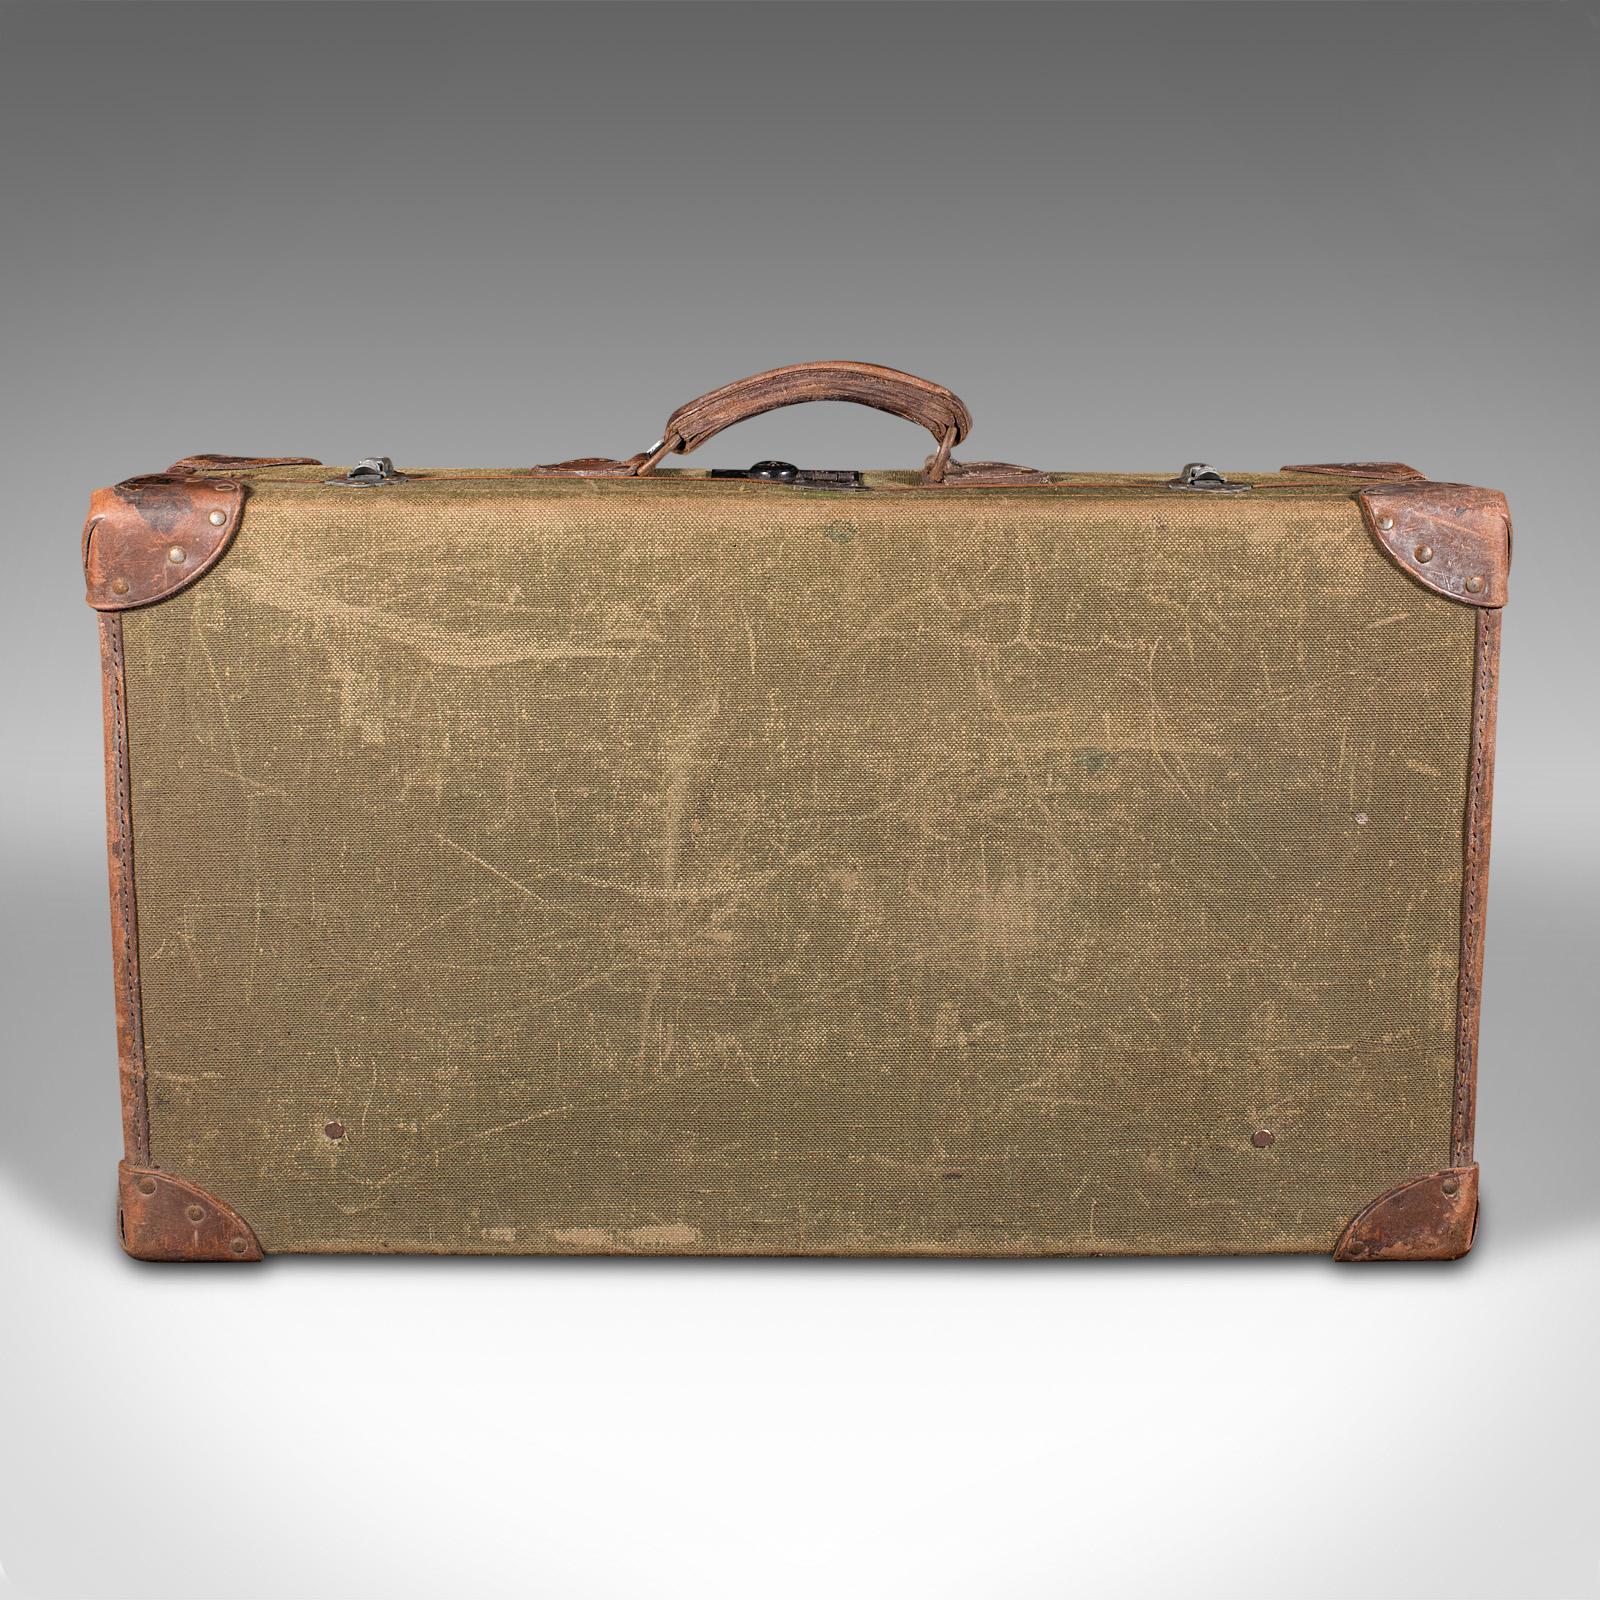 This is a vintage touring picnic set. An English, canvas and leather case, dating to the mid 20th century and later, circa 1950.

Charming vintage set, ideal for the luggage rack of classic sports cars
Displays a desirable aged patina